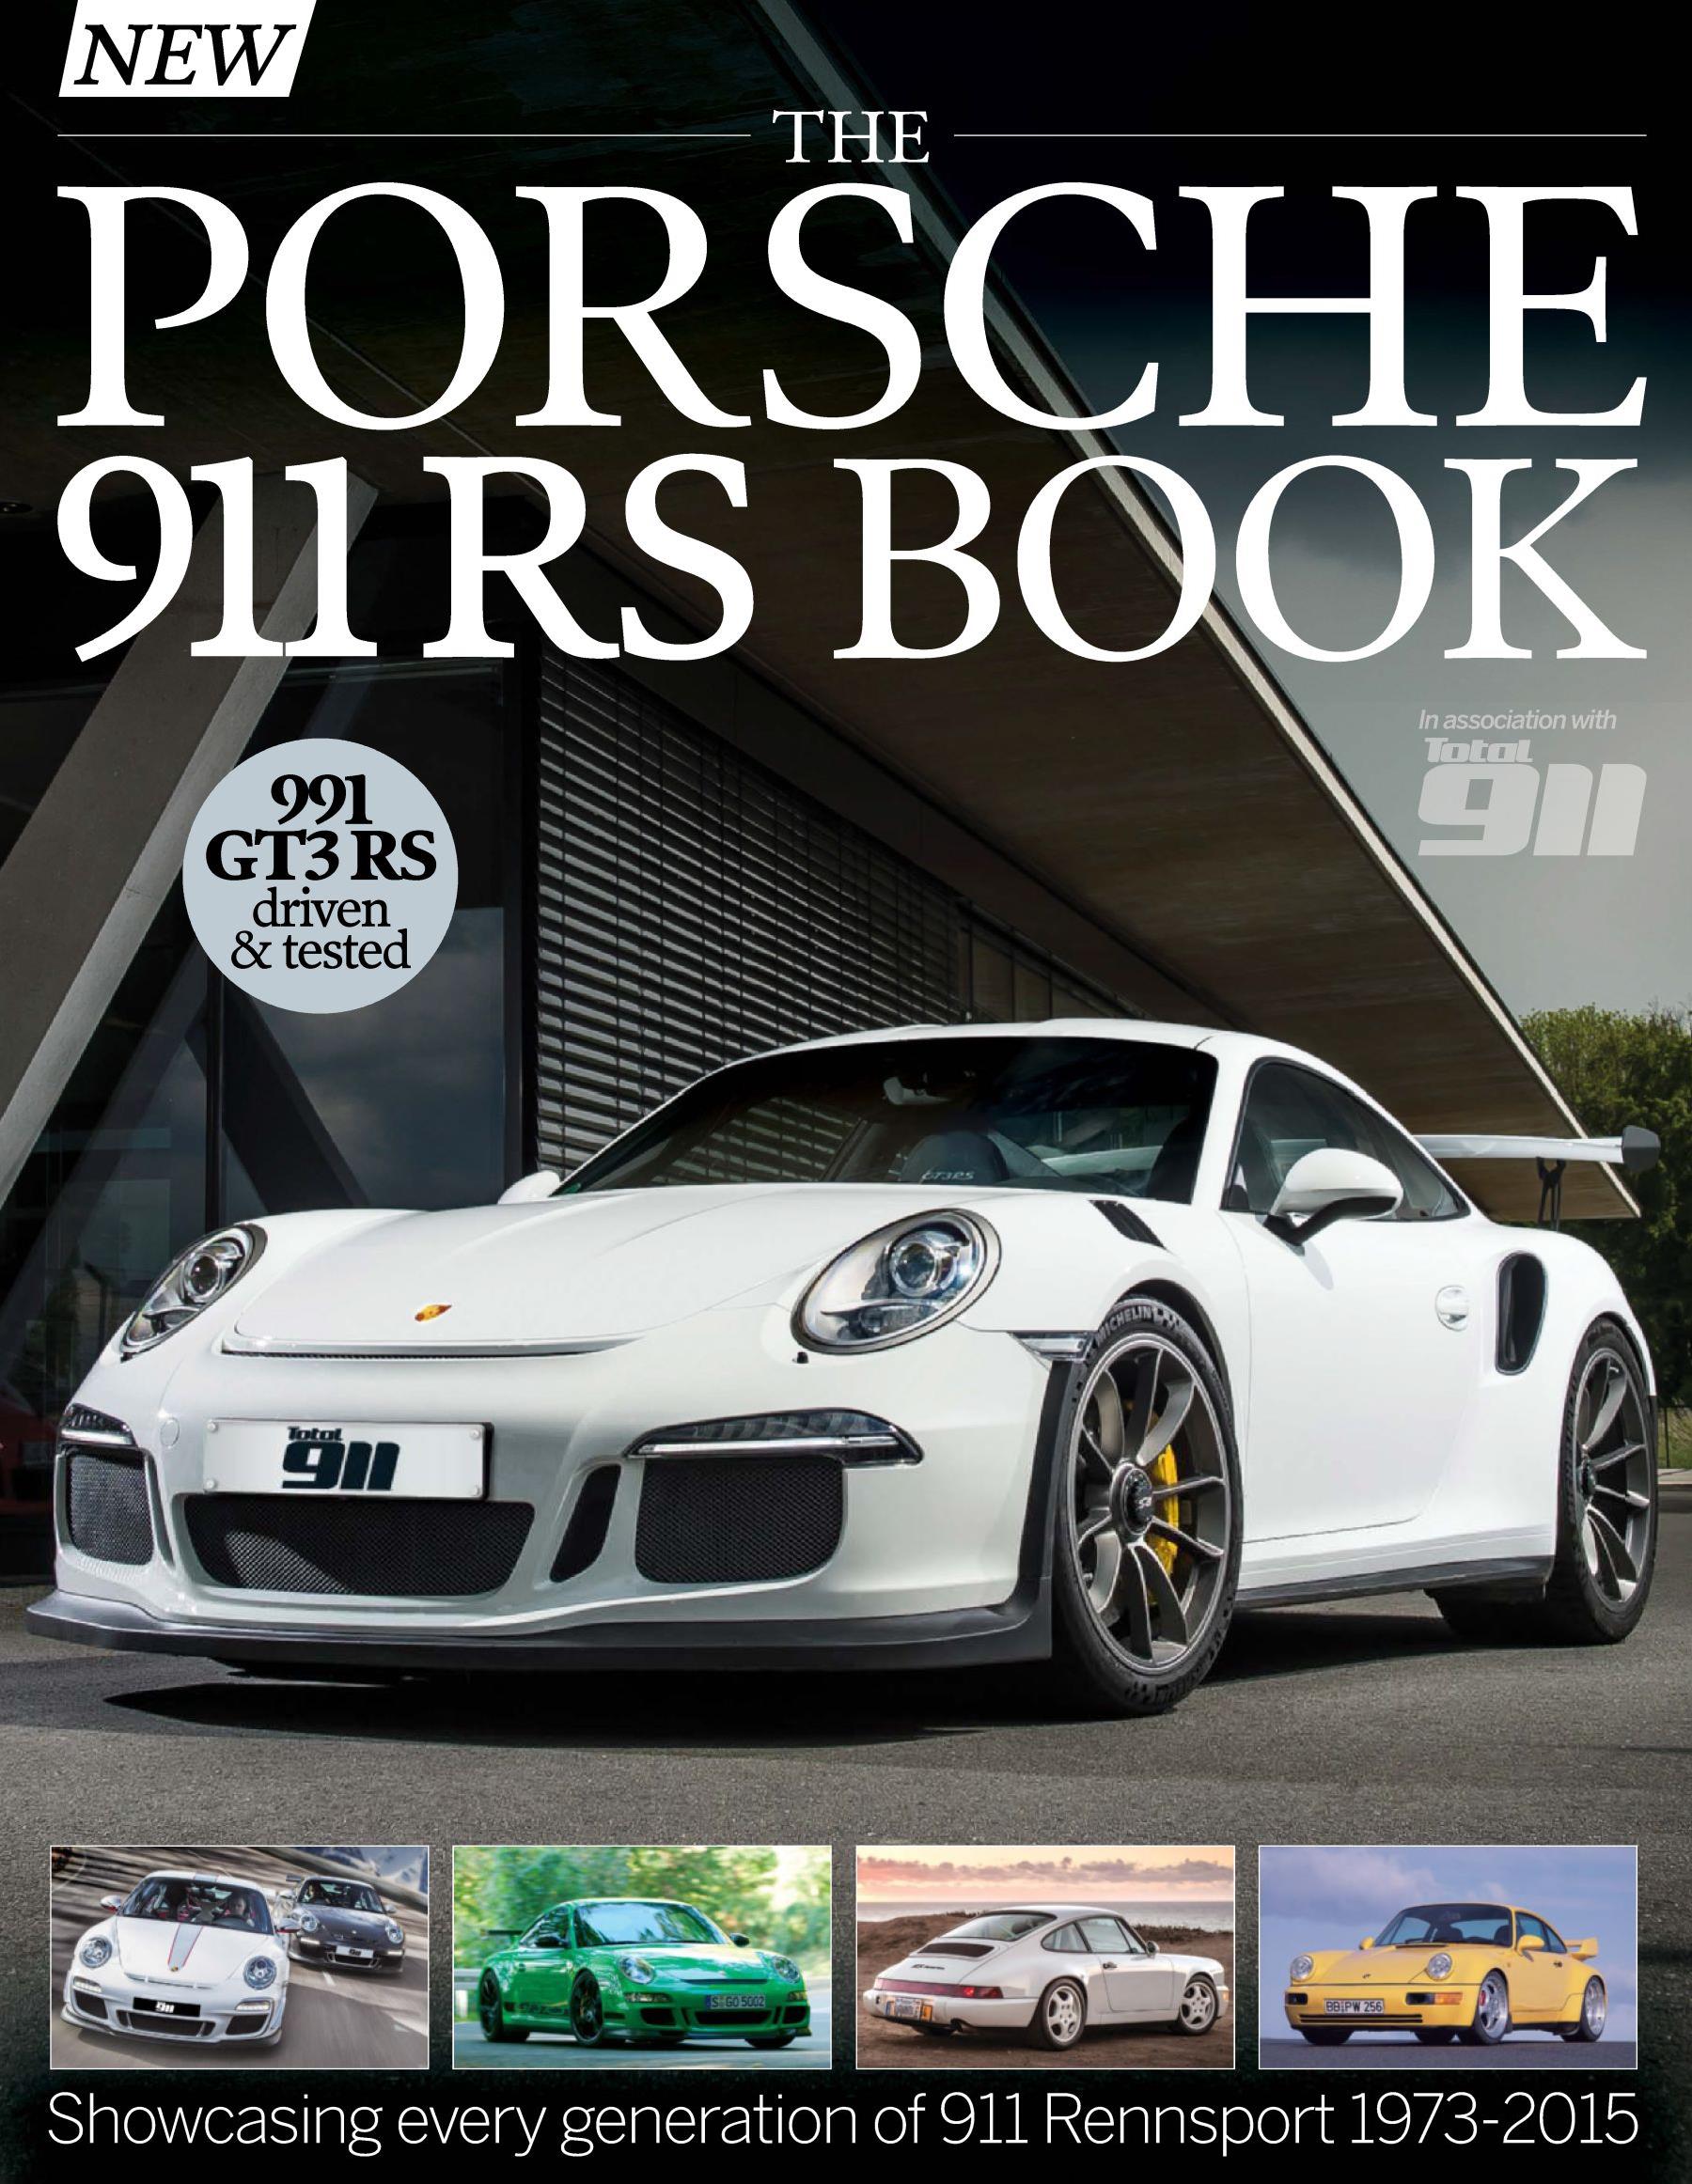 Журнал Porsche 911 RS Book.(from the publishers of Total 911)